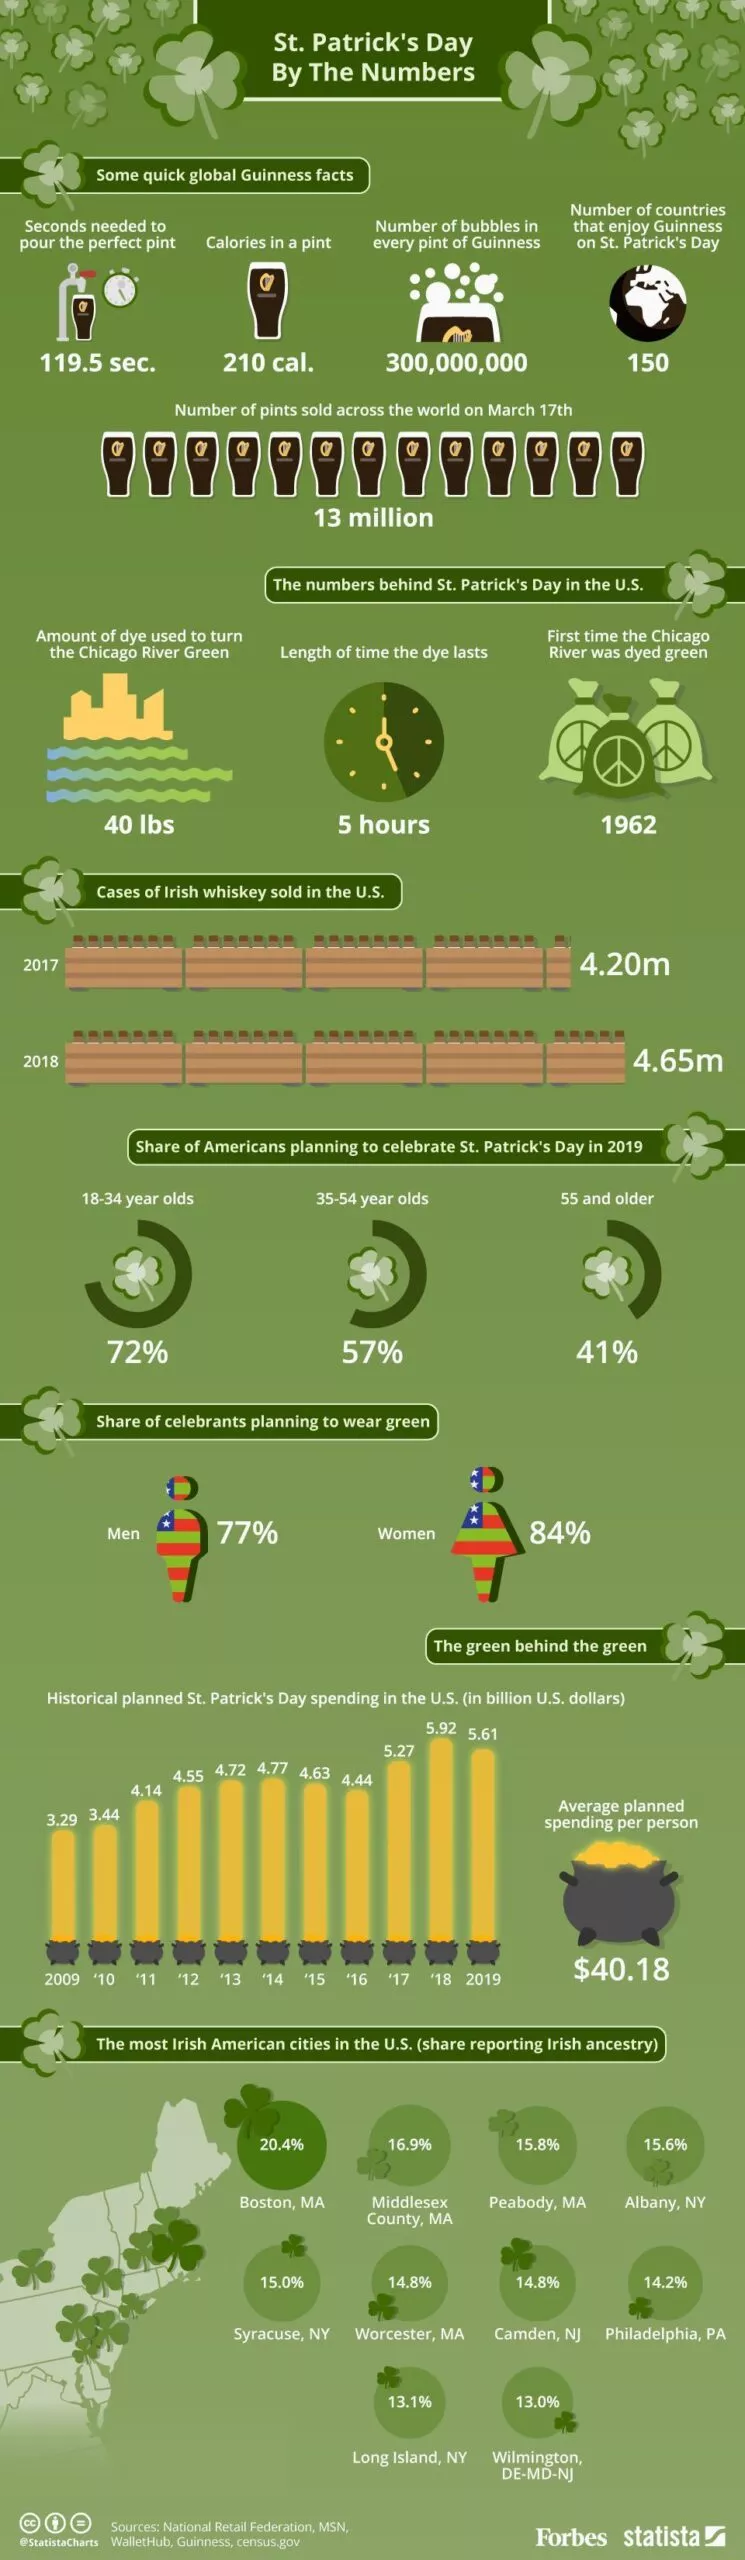 An infographic with interesting statistics about St. Patrick's Day